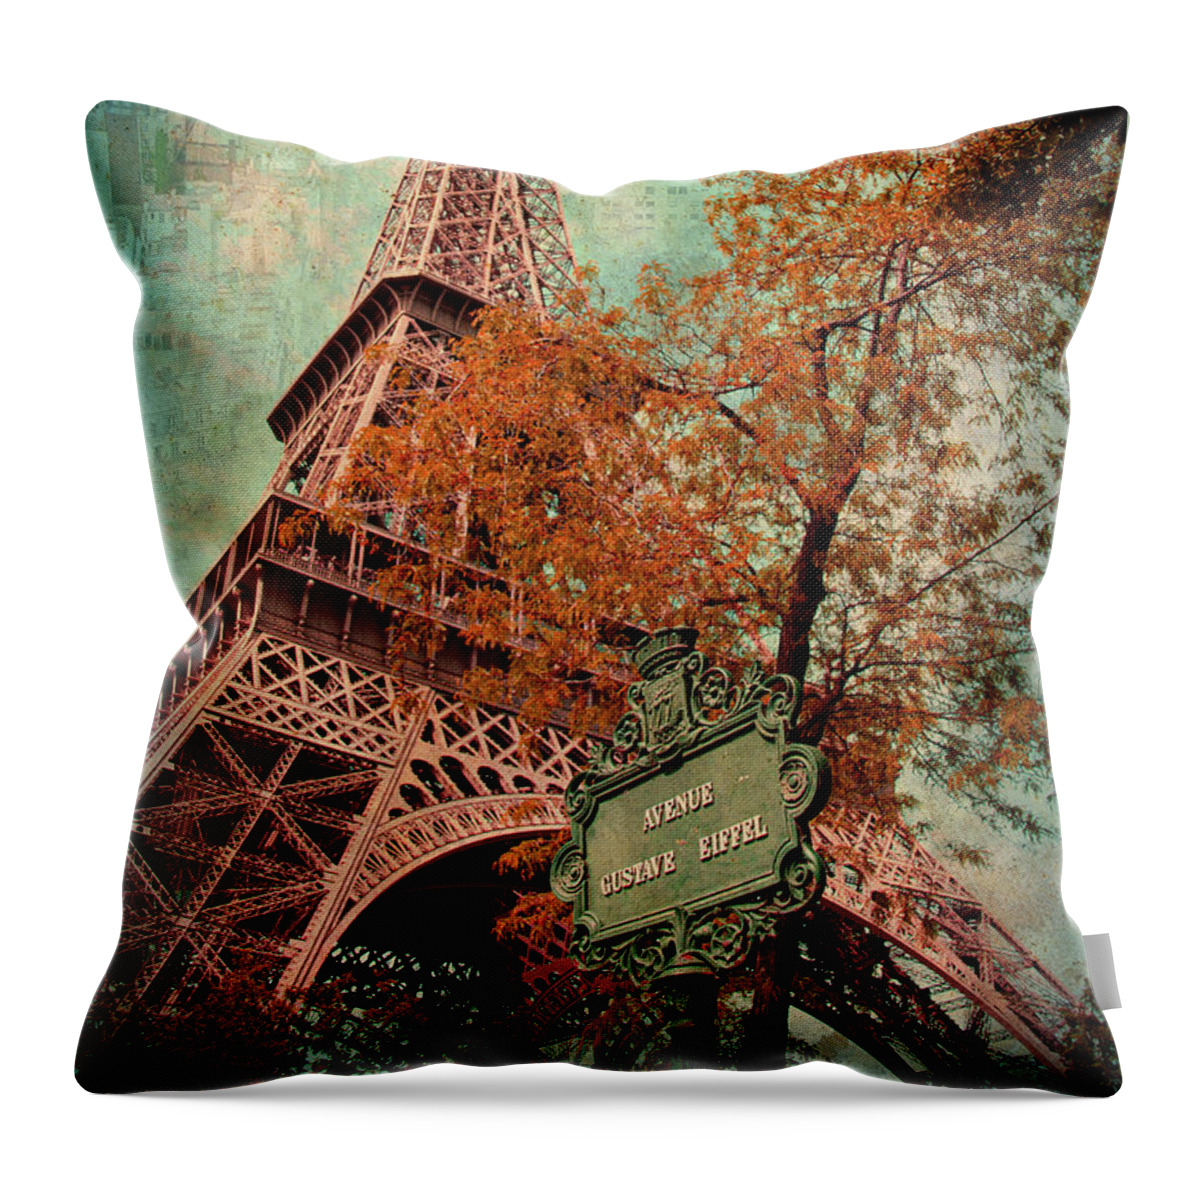 Eiffel Tower Throw Pillow featuring the photograph Eiffel Tower - Paris, France by Denise Strahm